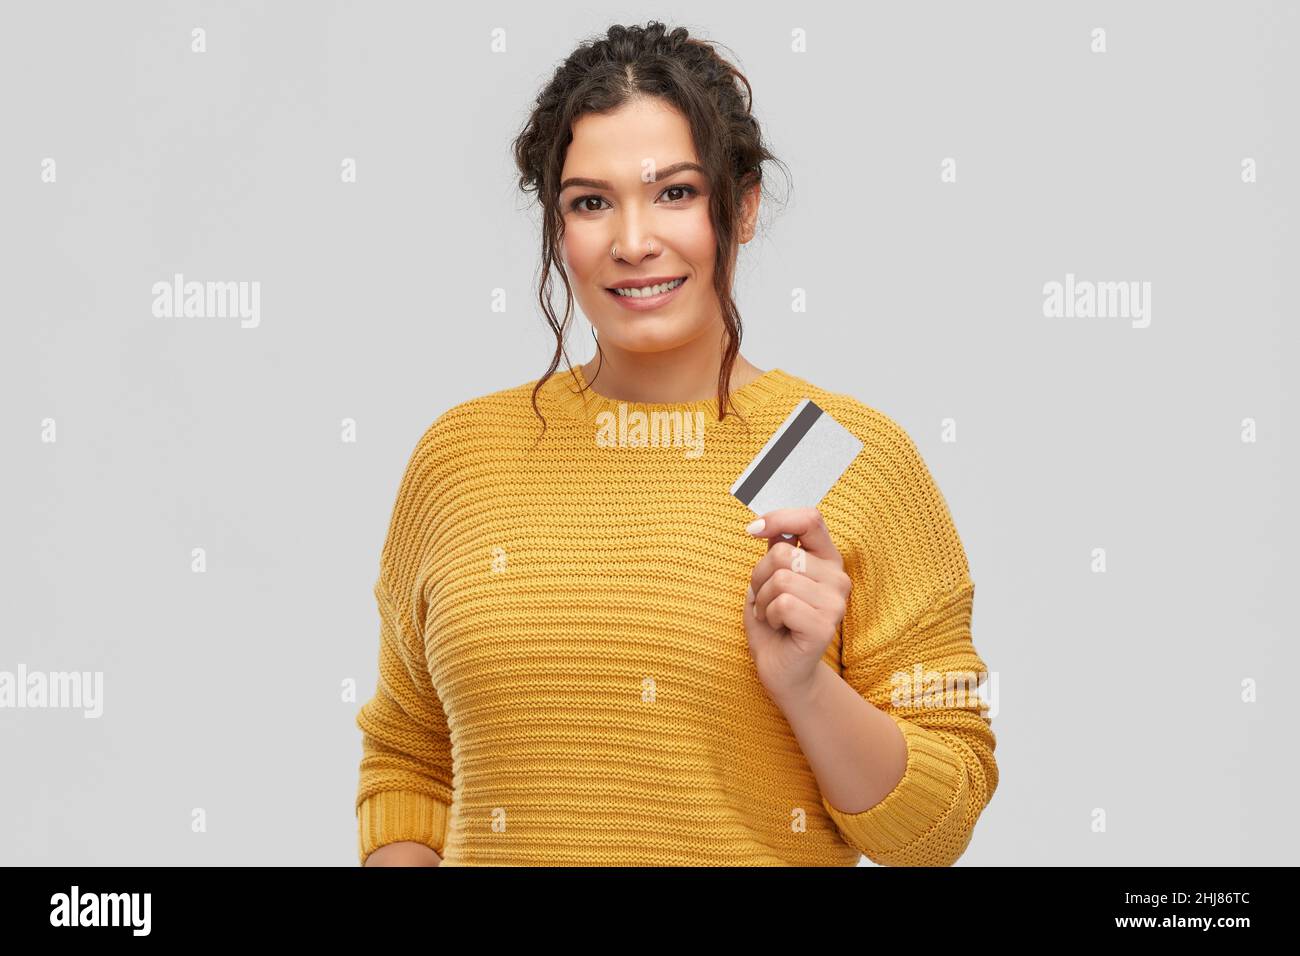 happy smiling young woman with credit card Stock Photo